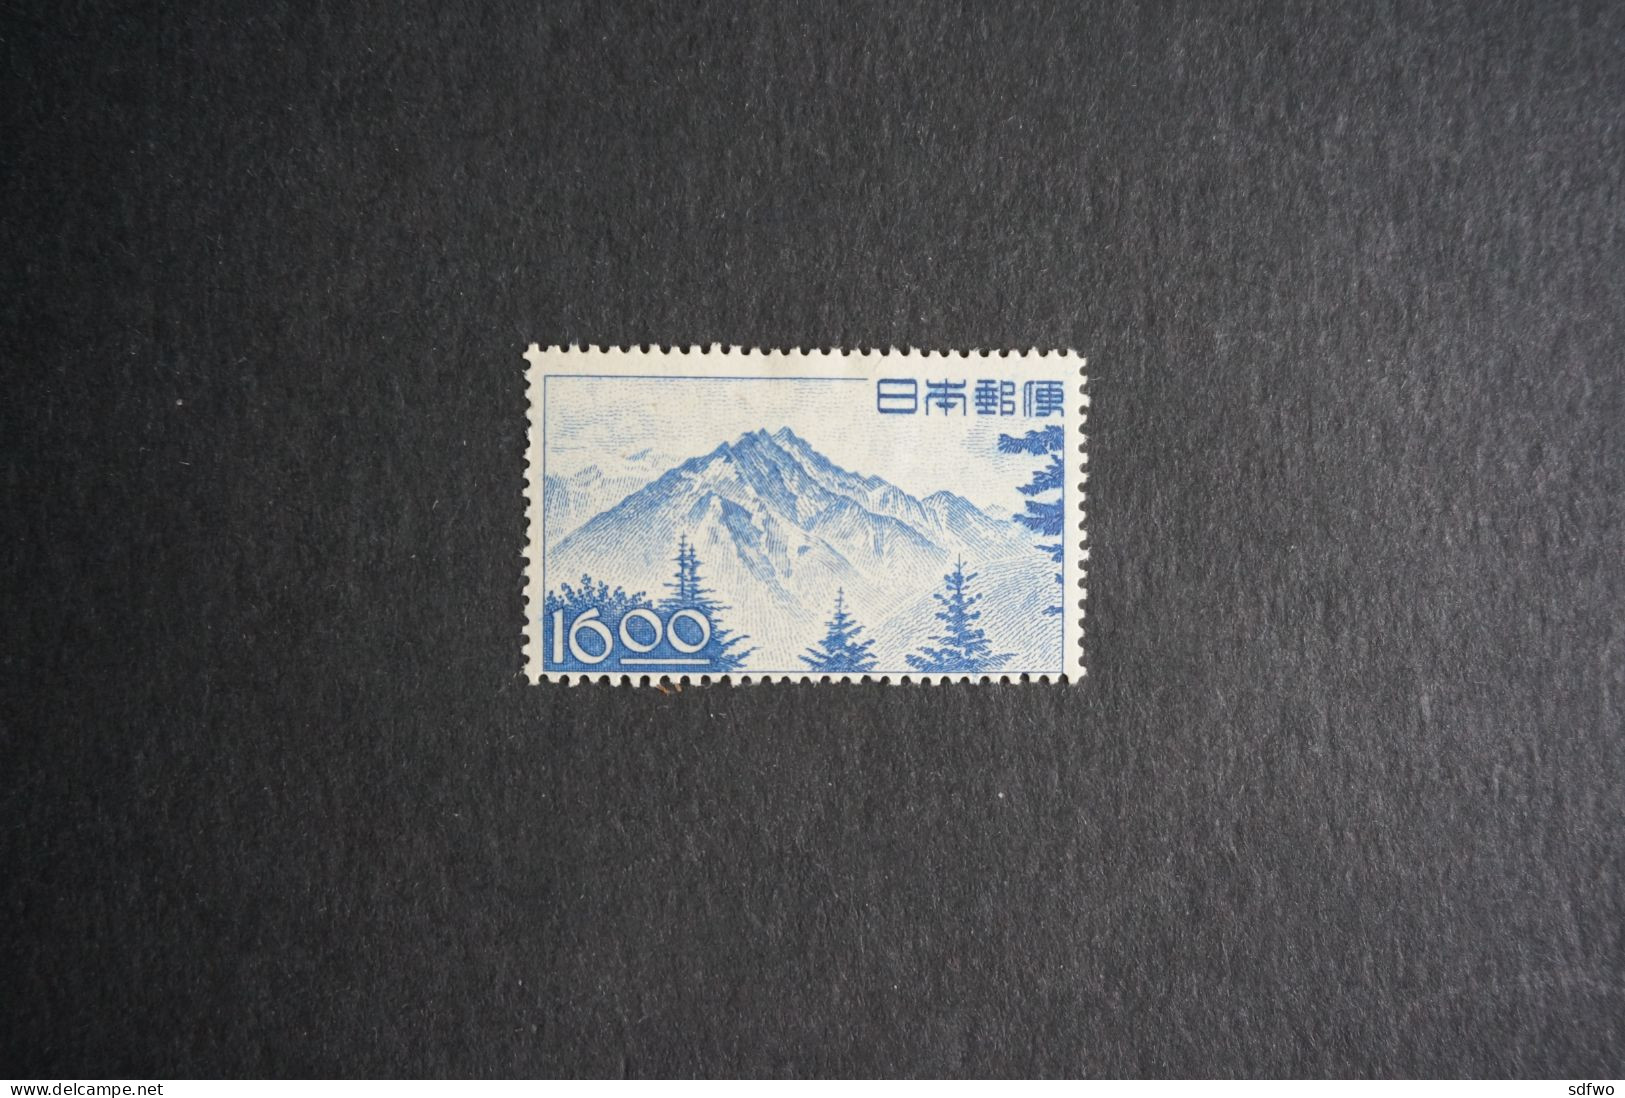 (T5) Japan - 1949 Mountain & Forest  6y - #C156 (MH) - Unused Stamps